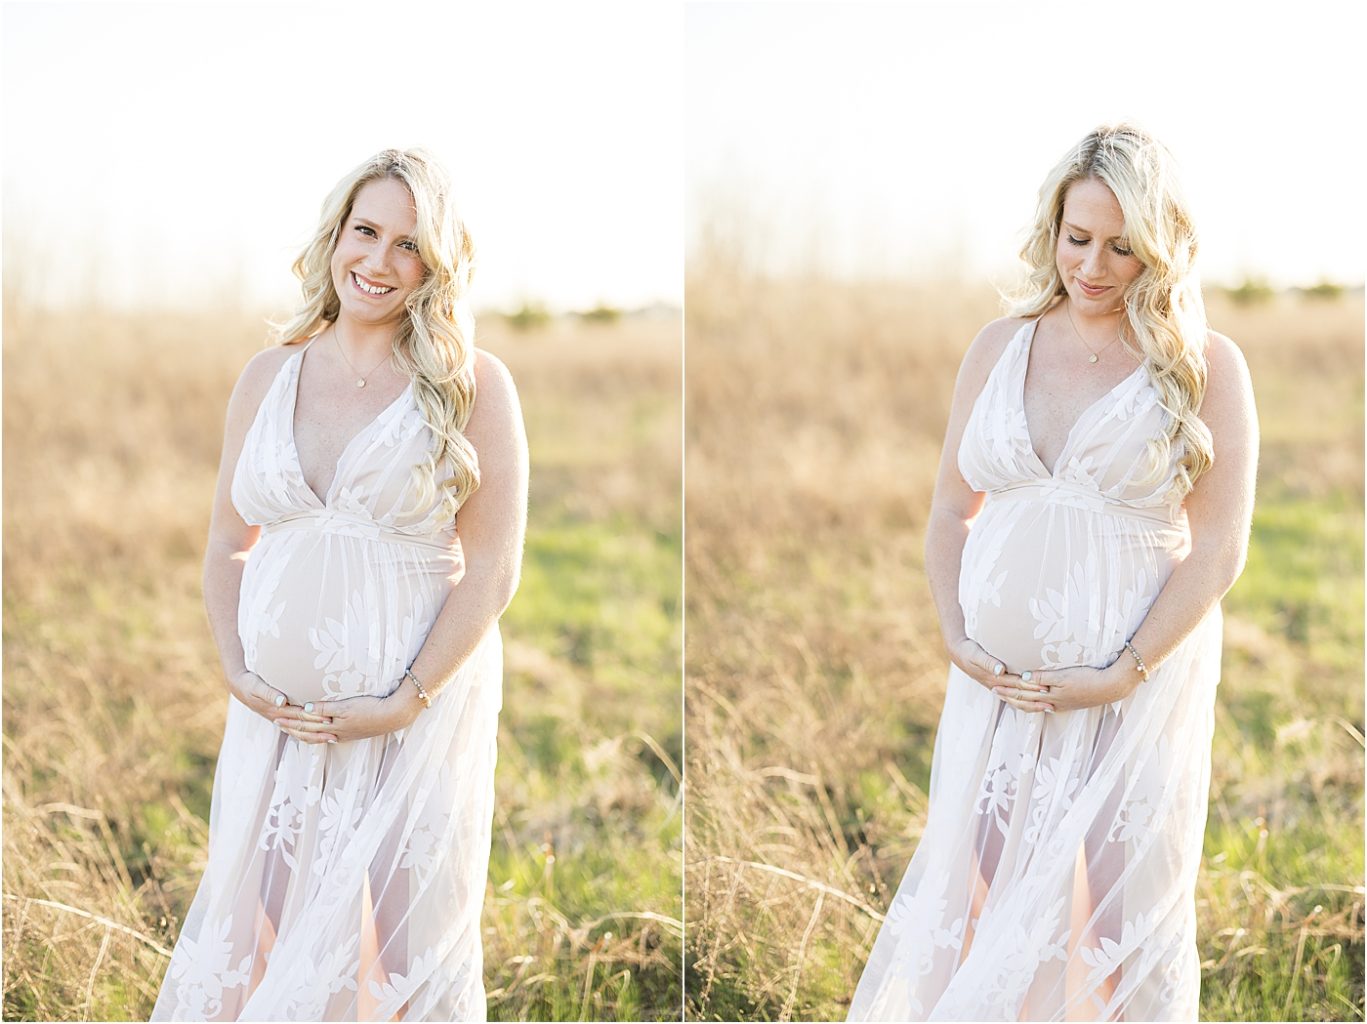 Mom wearing white lace dress for maternity photos with Fishers photographer, Lindsay Konopa Photography.